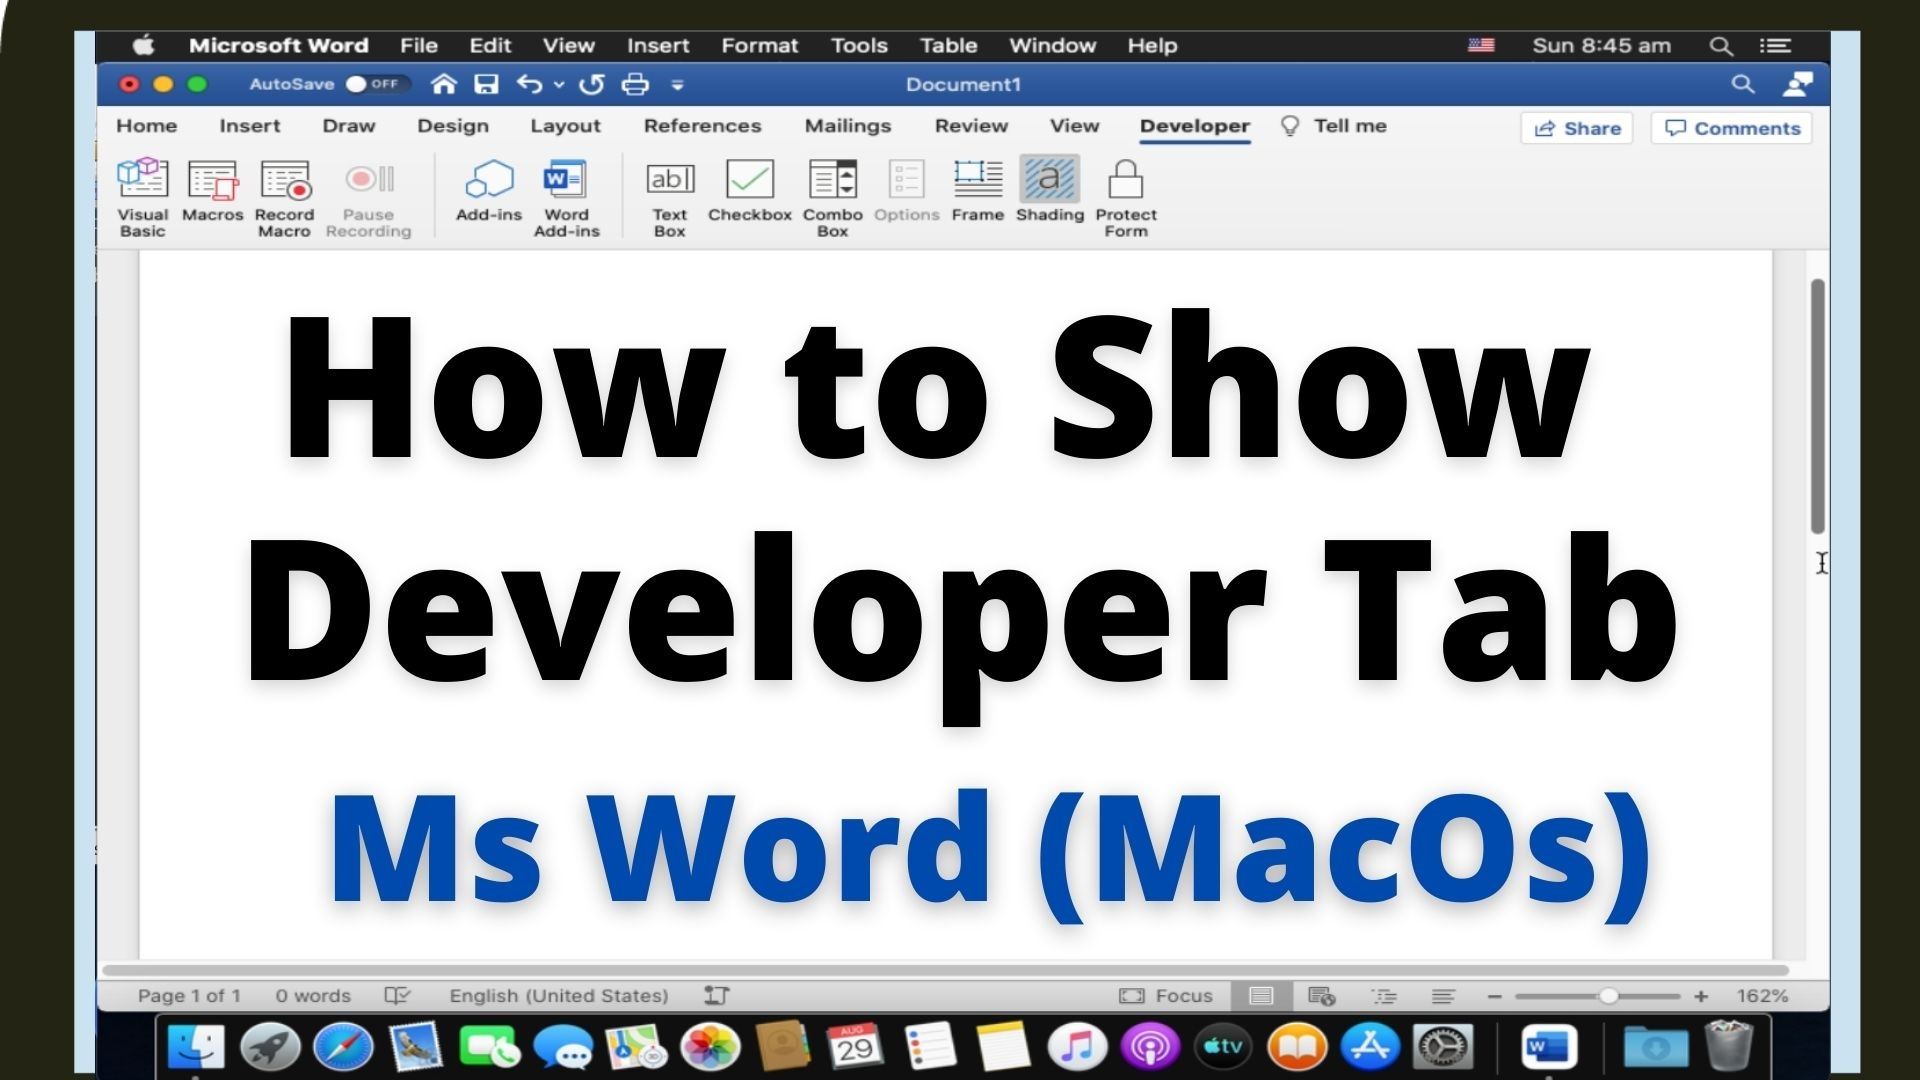 How to show developer tab in Word for MacOs